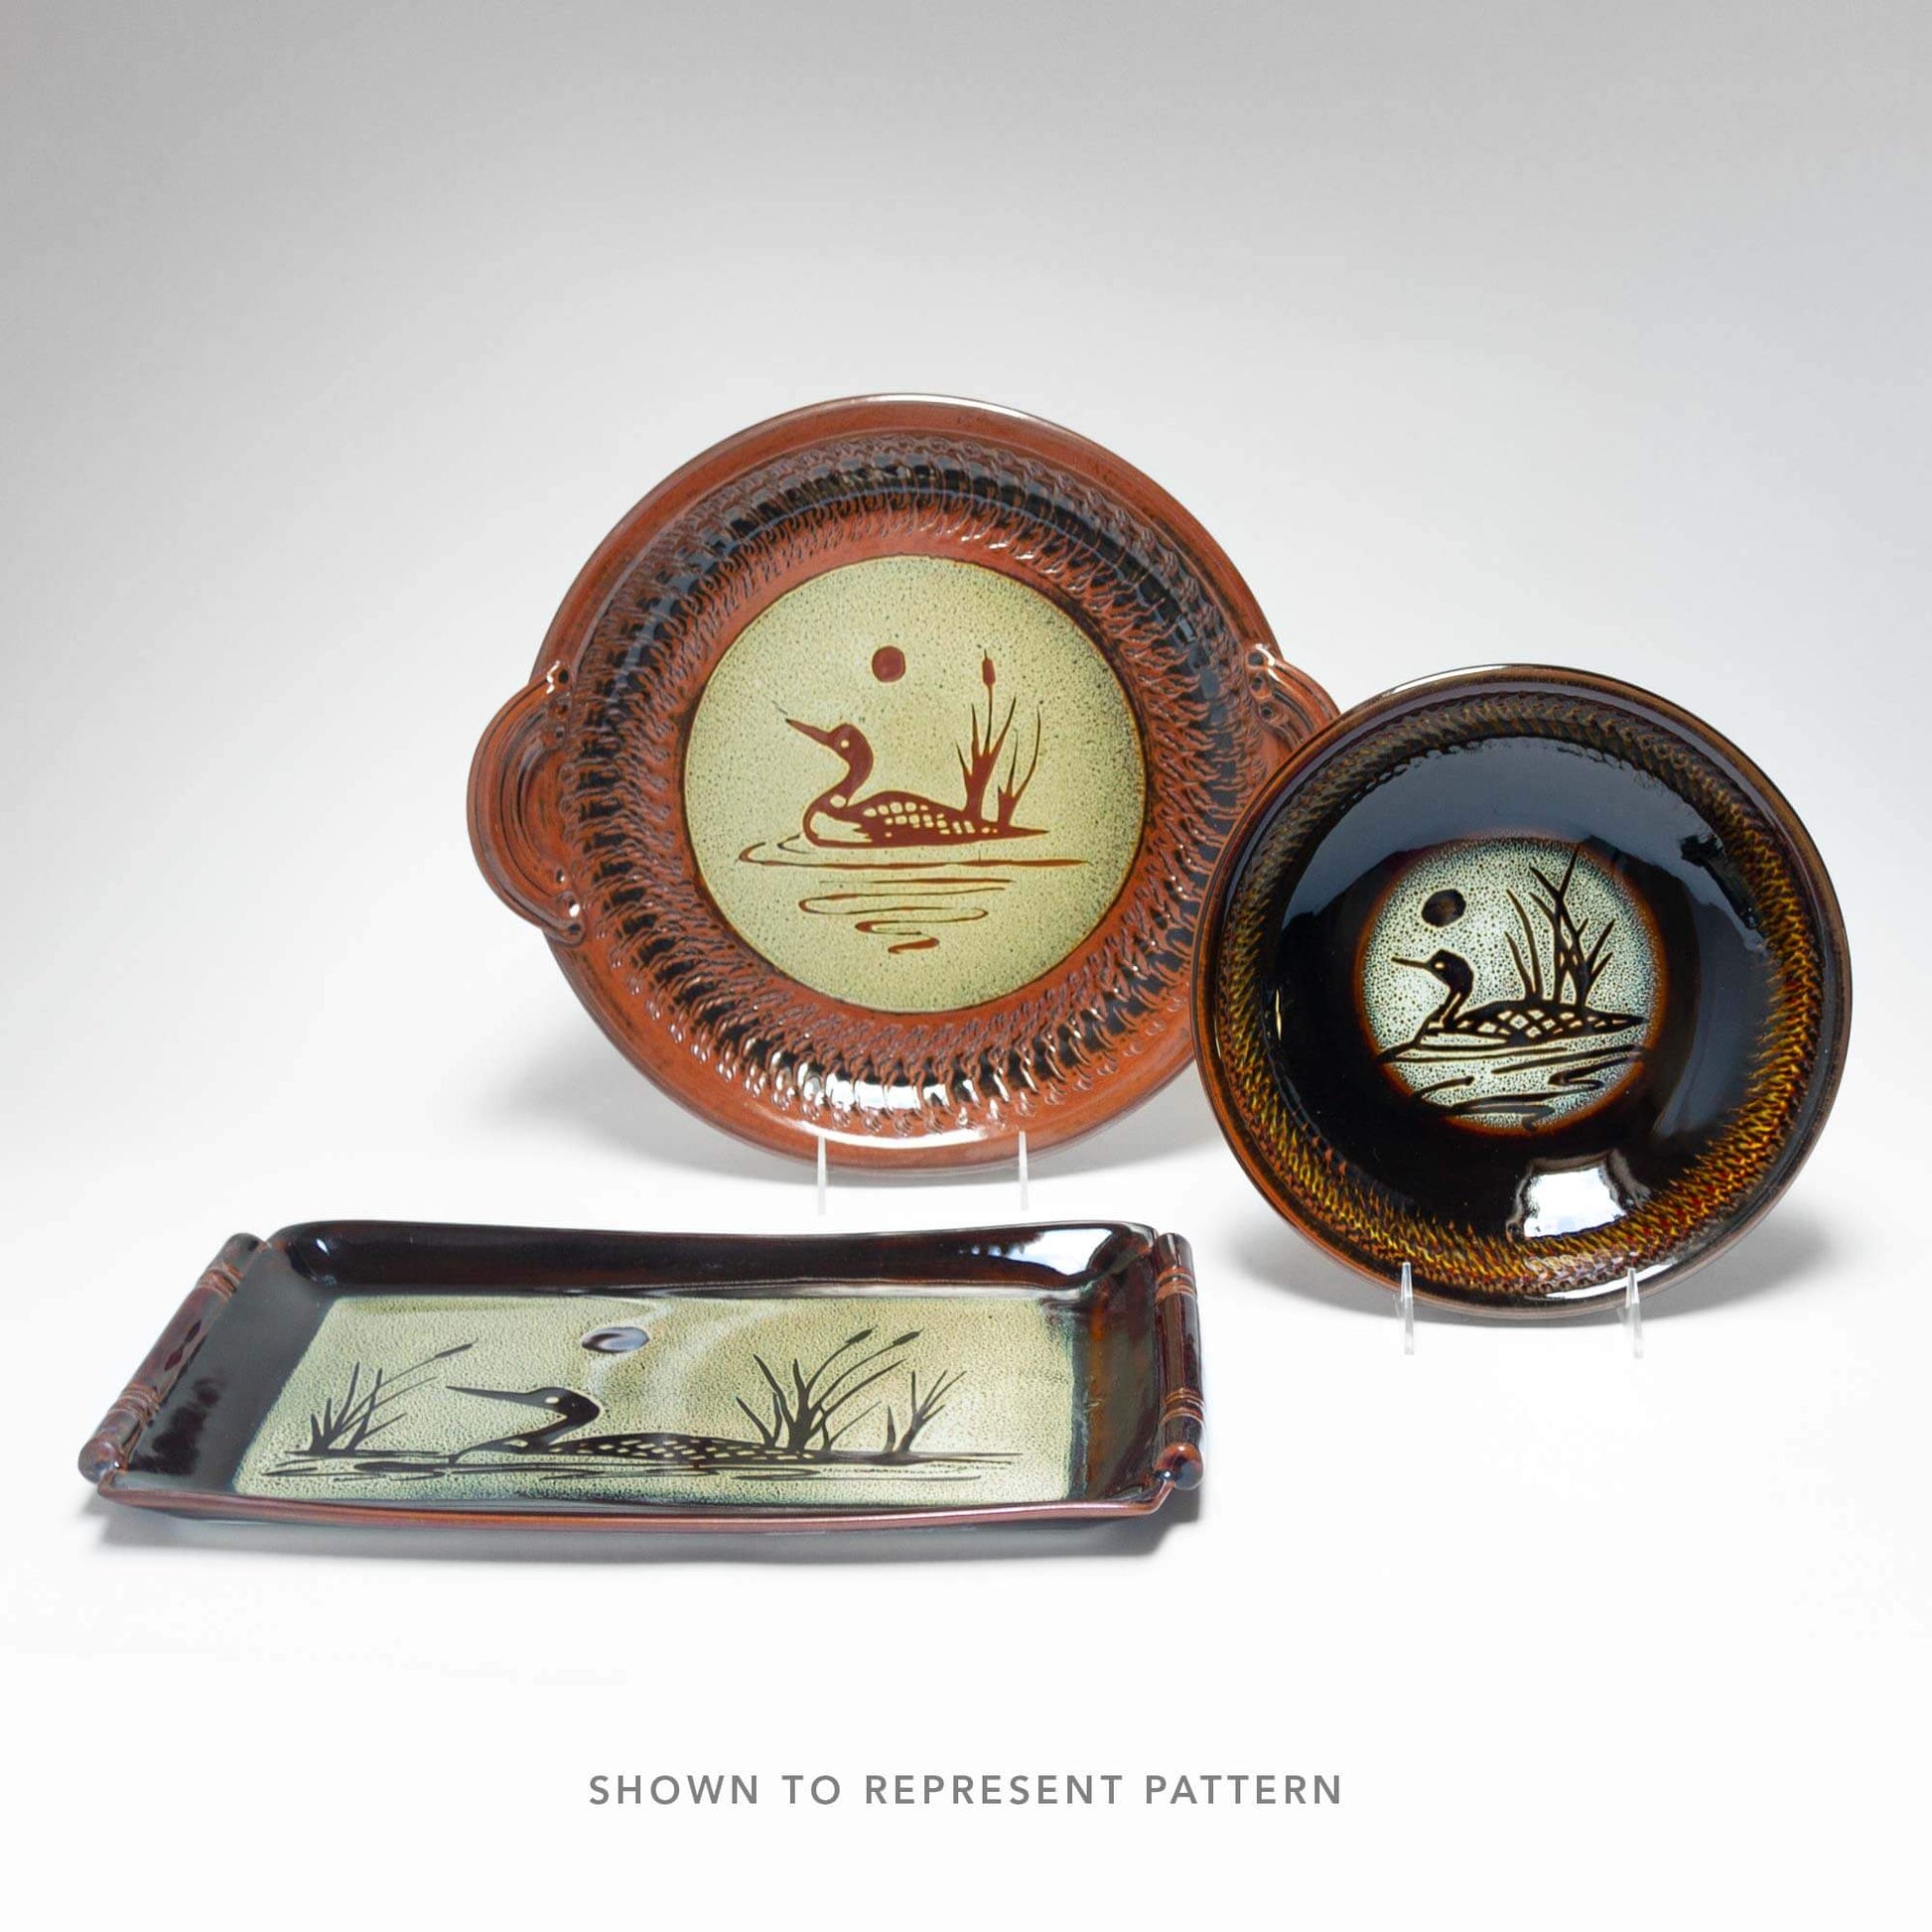 Handmade Pottery Small Clock w/ Stand in Hamada Loon pattern made by Georgetown Pottery in Maine